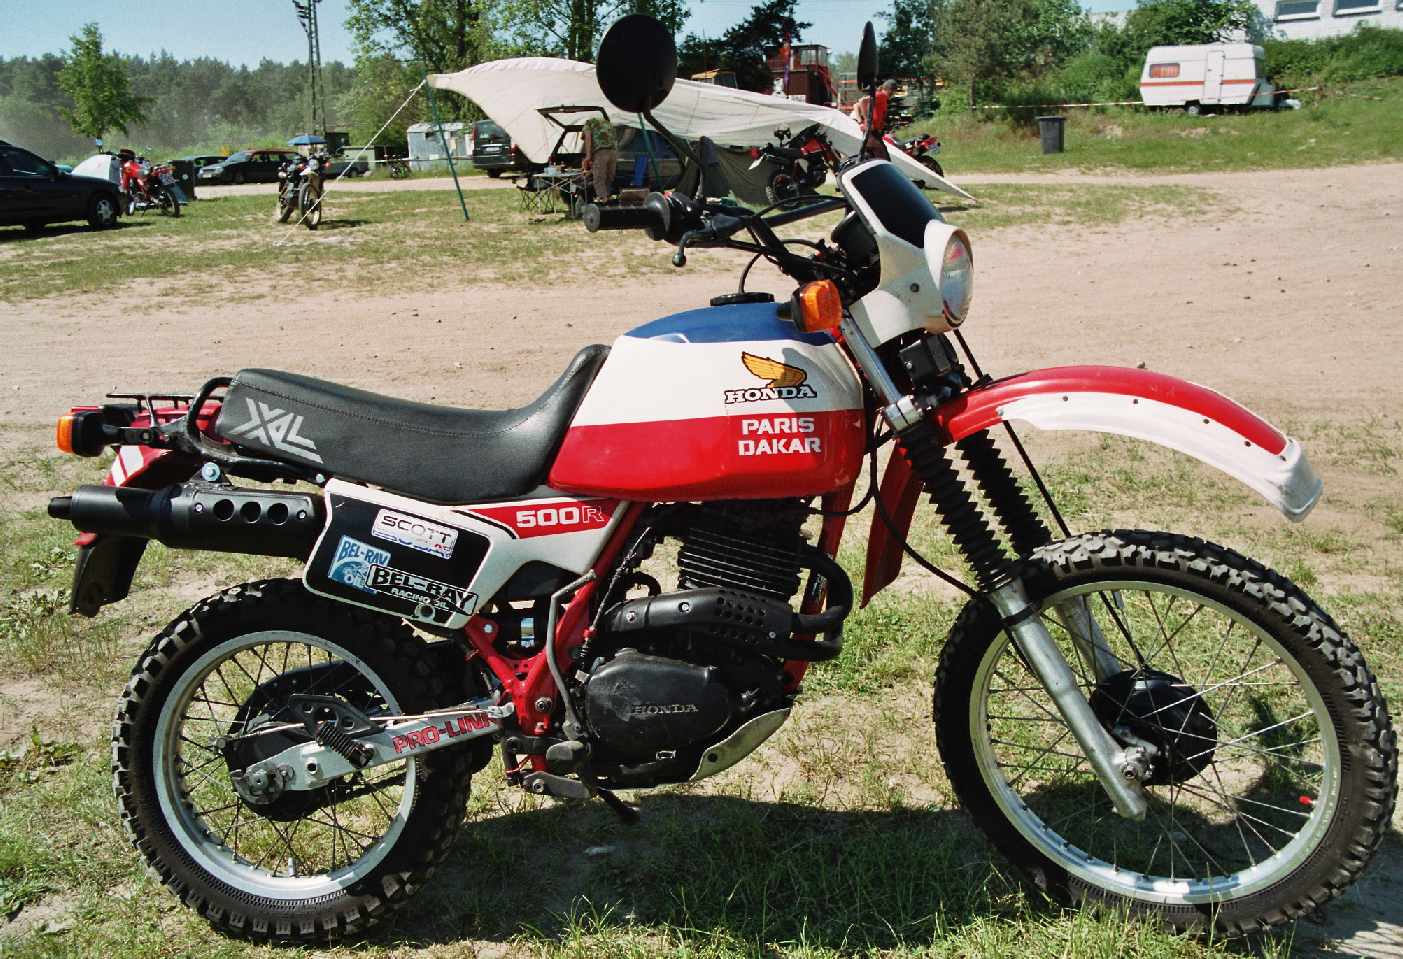 Review Of Honda Xl 500 R 1983 Pictures Live Photos Description Honda Xl 500 R 1983 Lovers Of Motorcycles